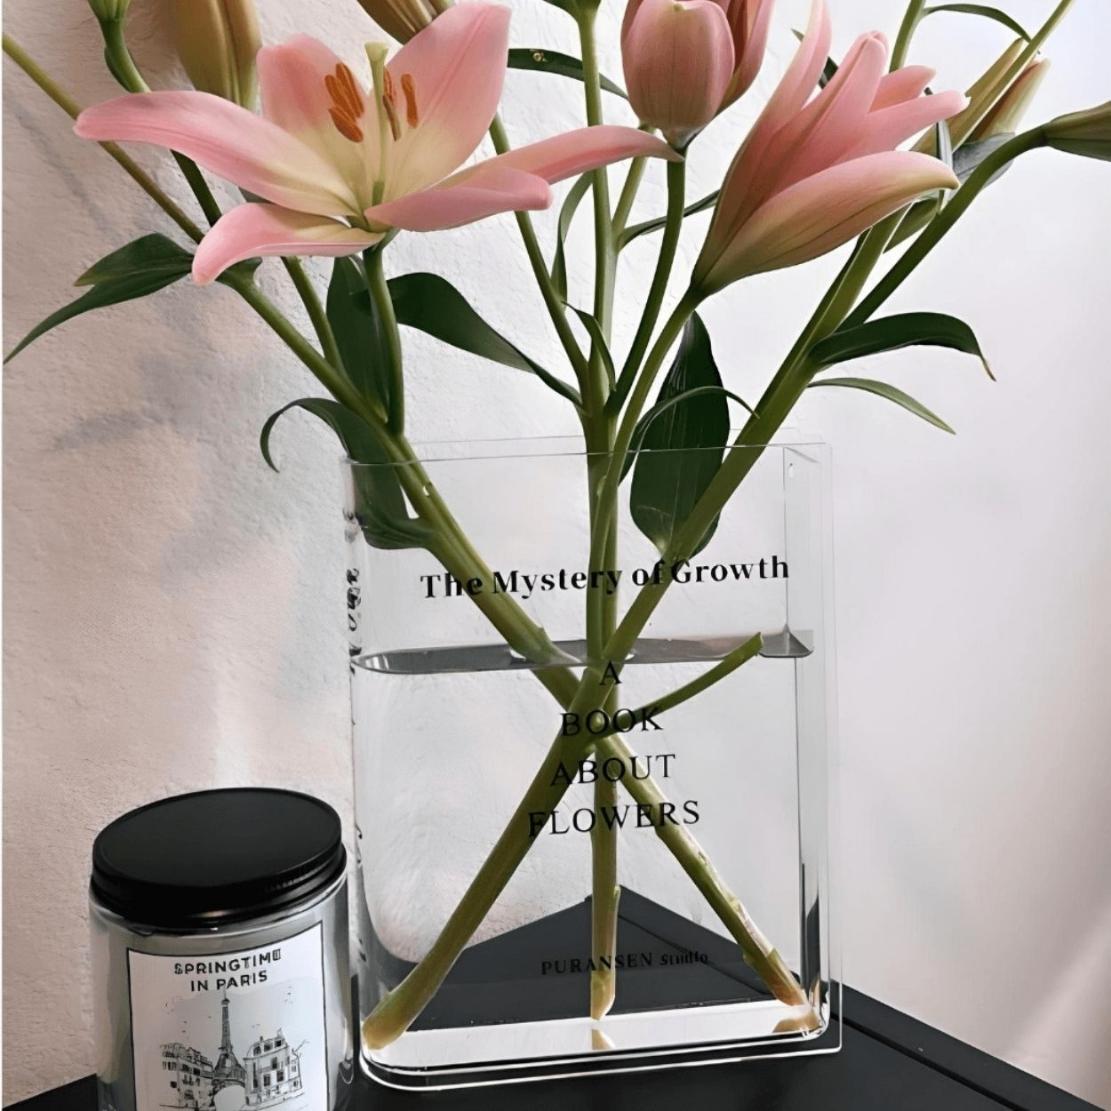 Acrylic book vase with pink flowers